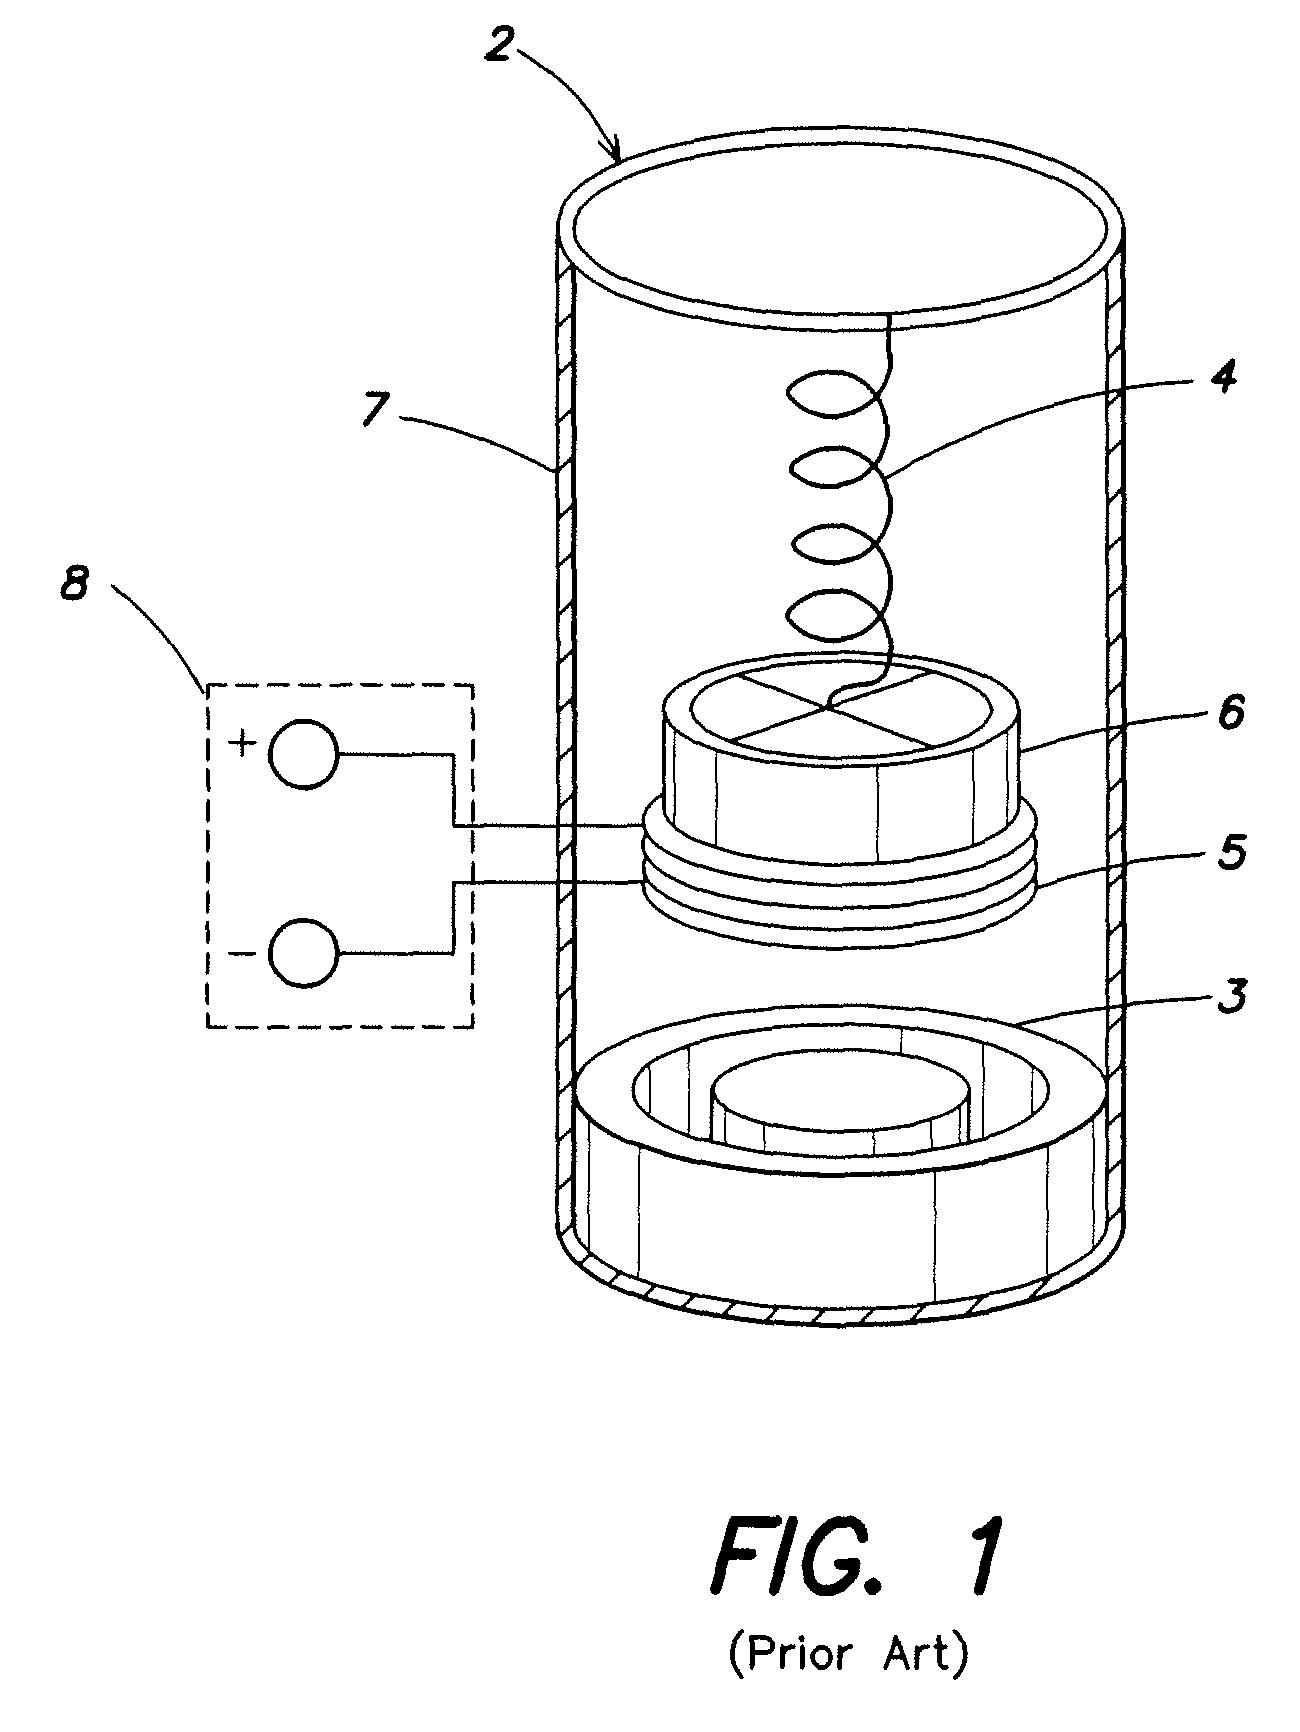 Apparatus and method utilizing magnetic field